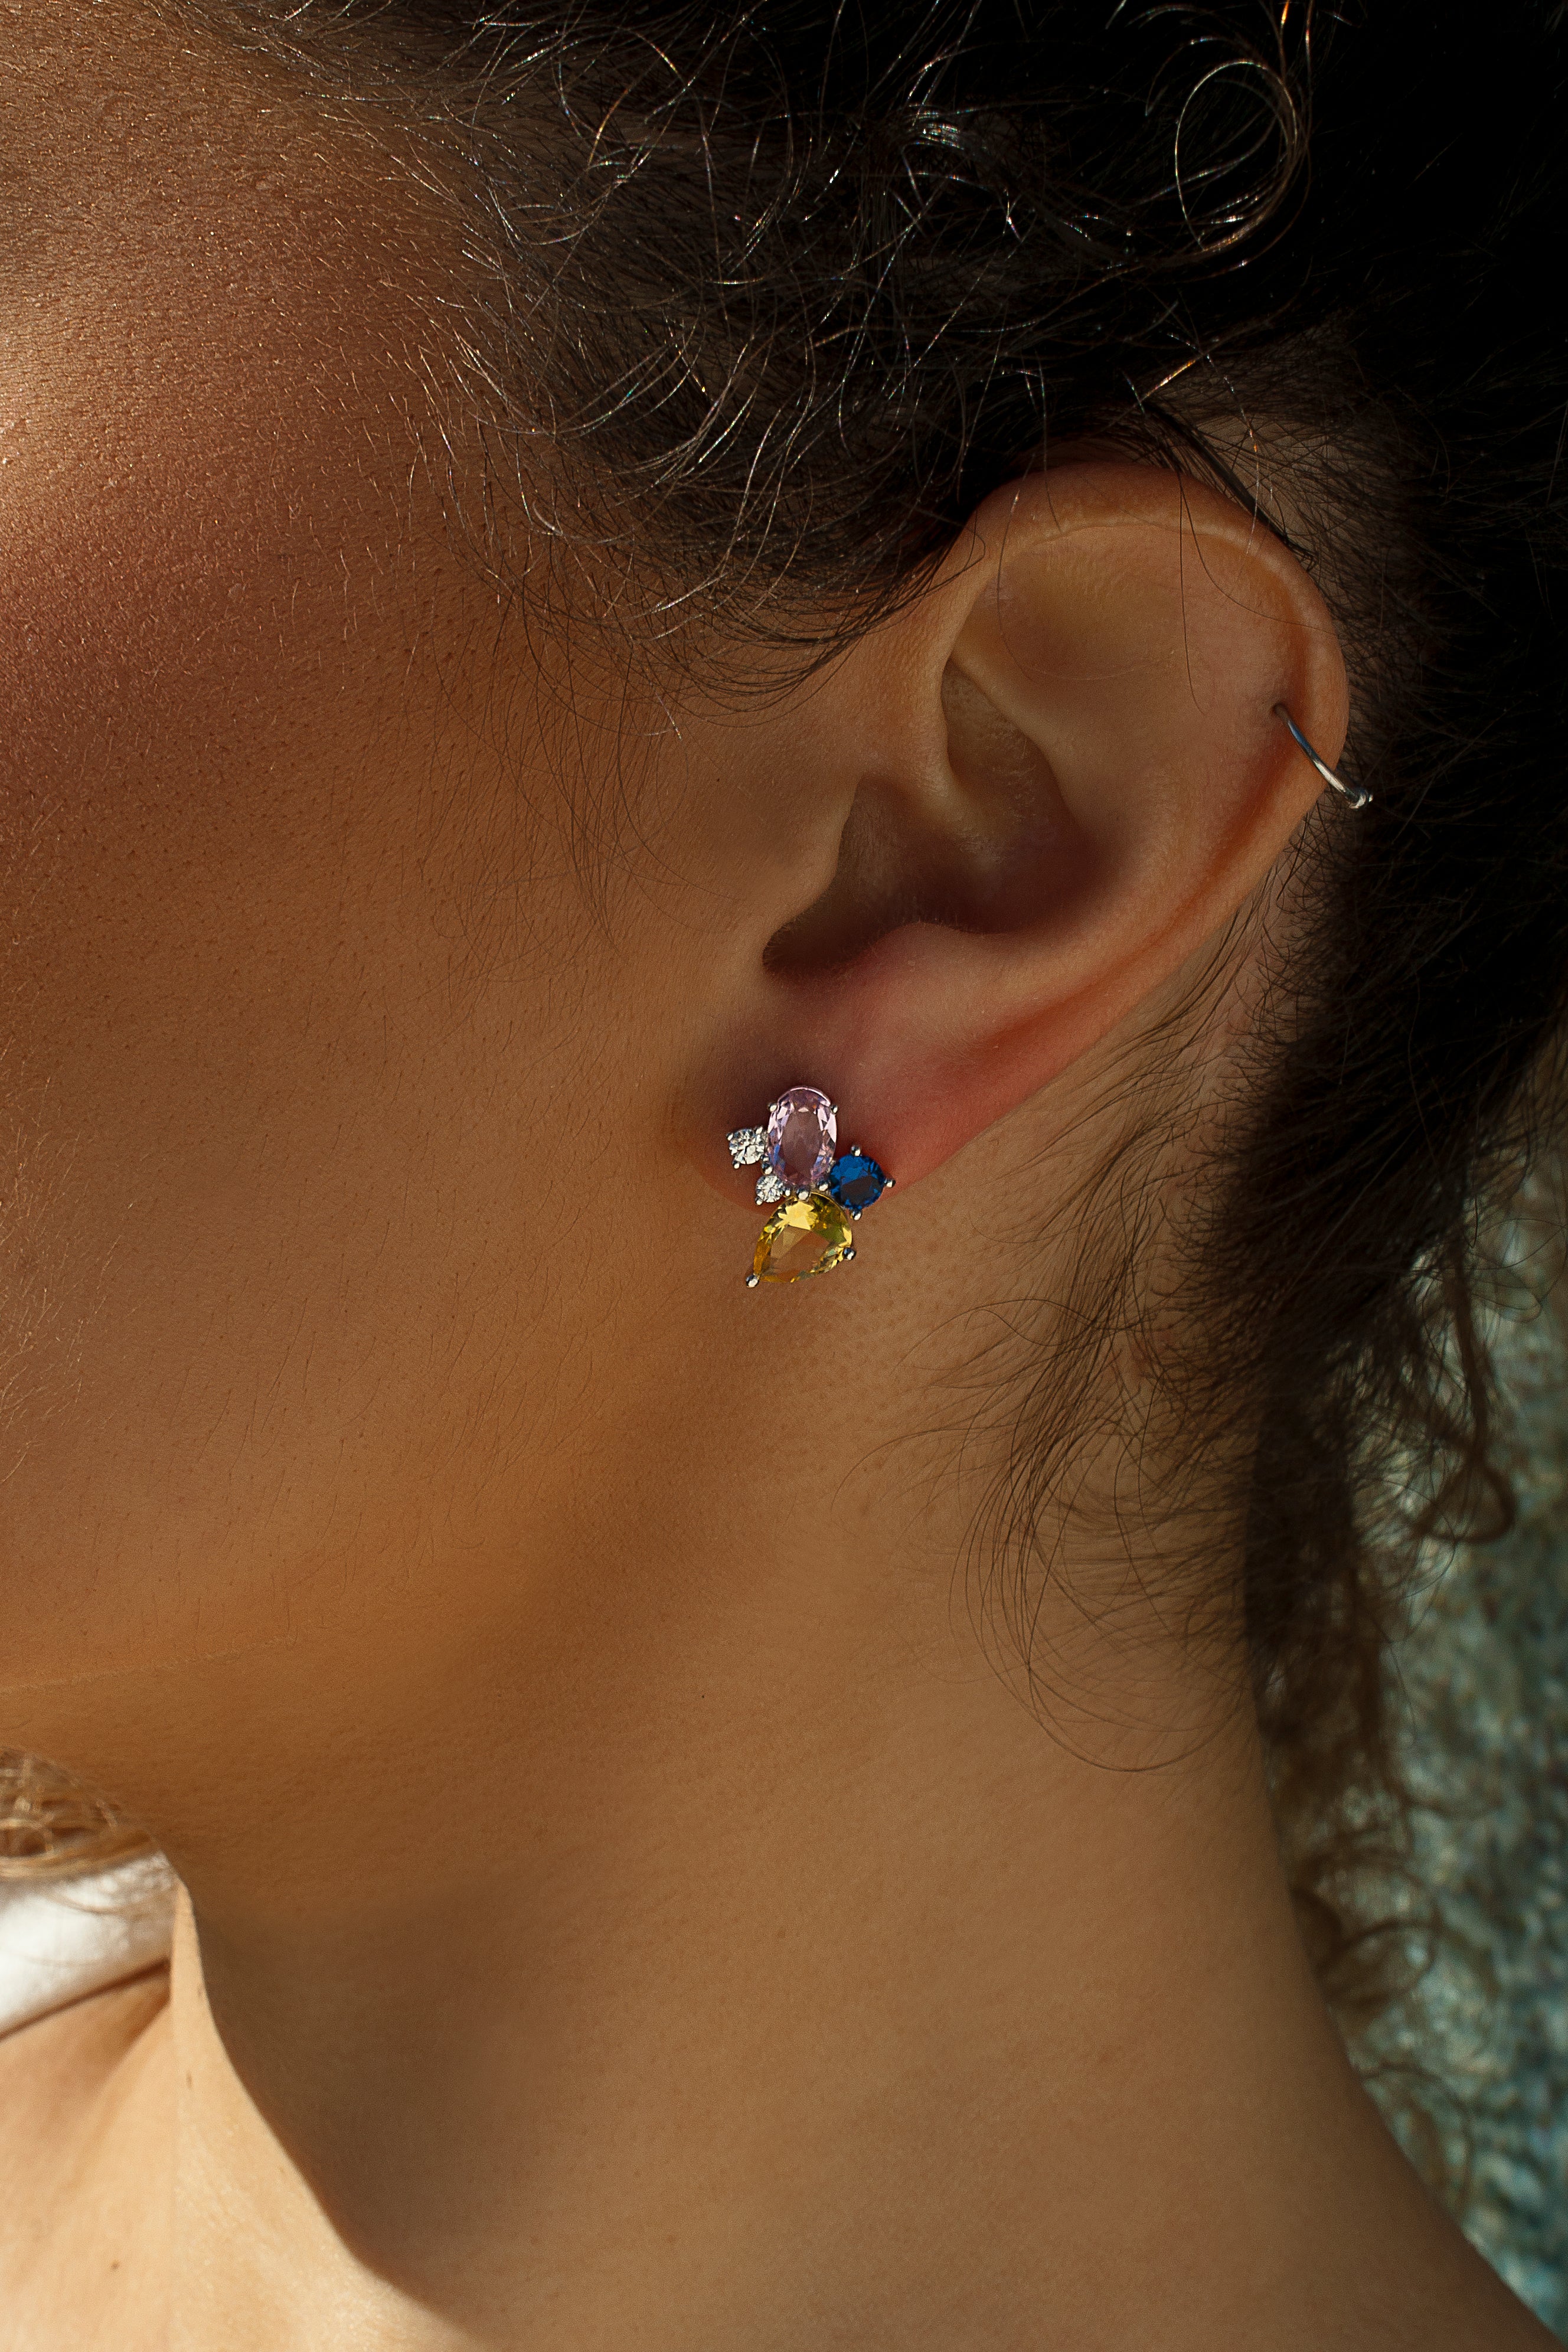 Earrings with colored stones button style in bright tones